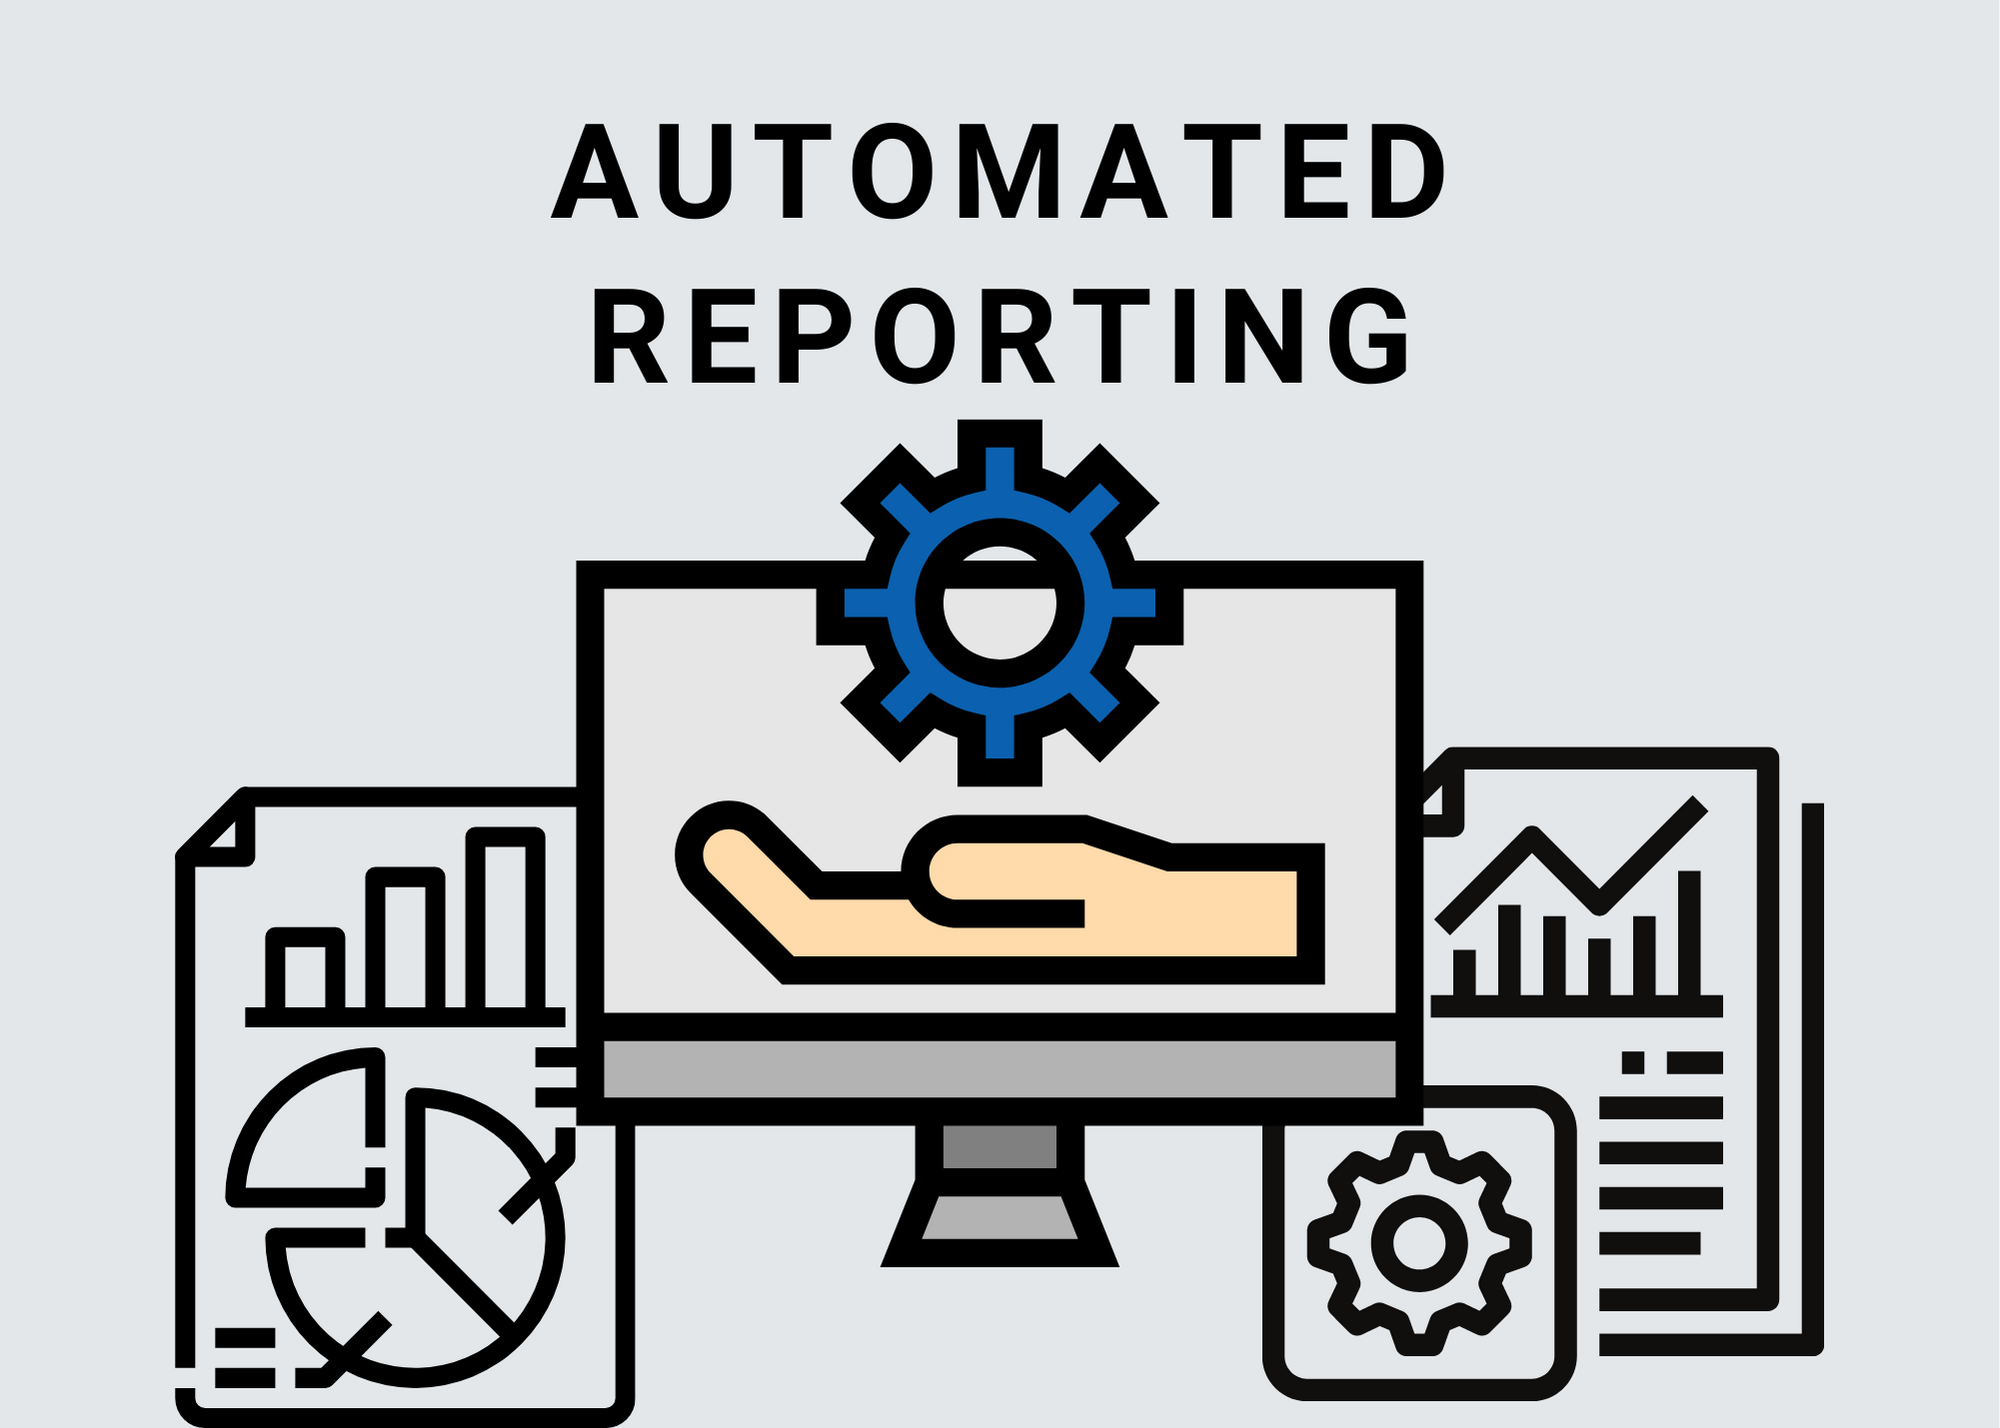 LoanBoss's Automated Reporting feature 